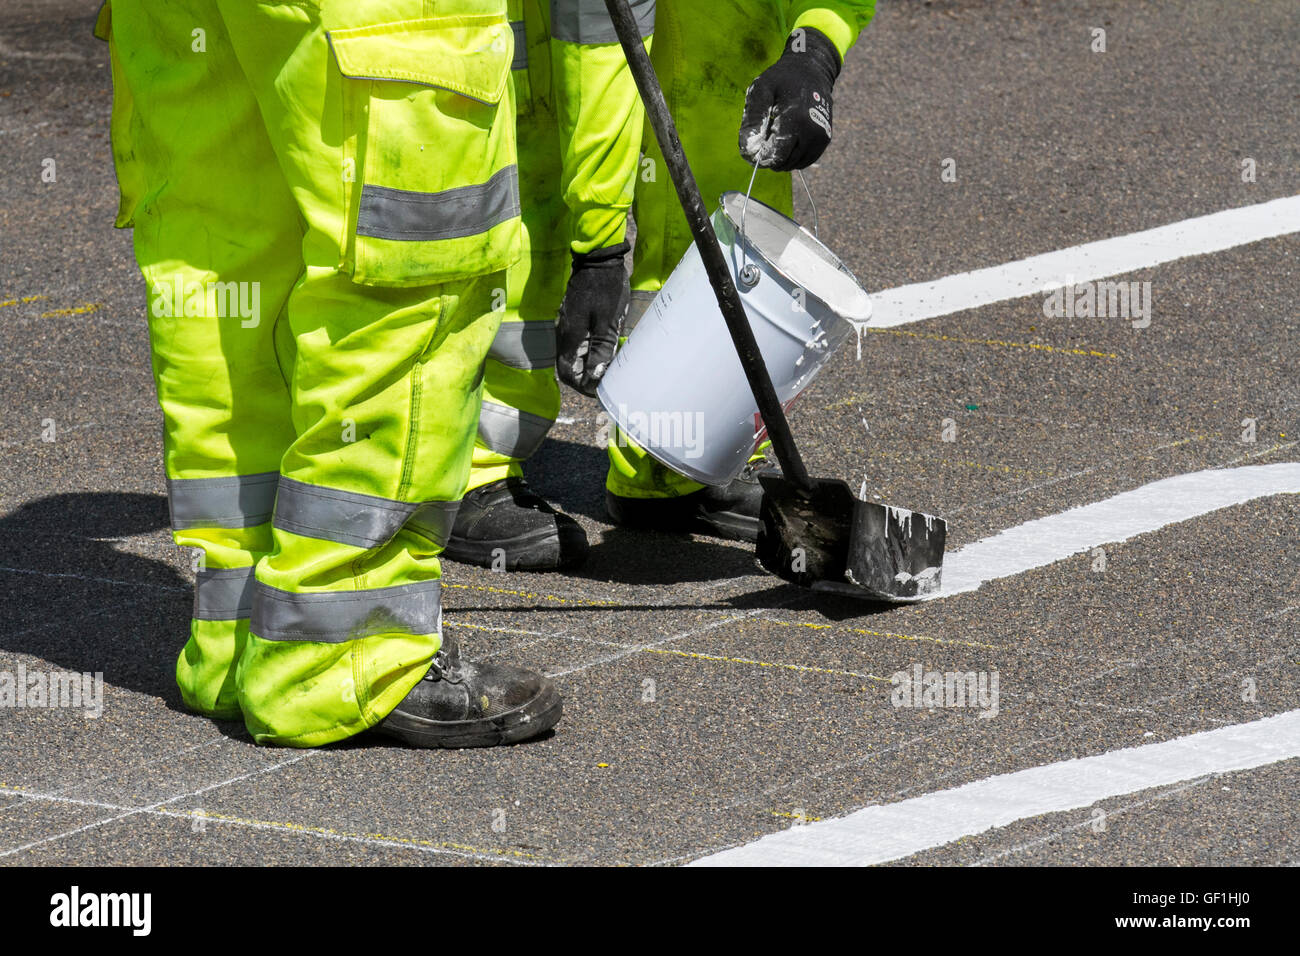 City Council maintenance roadworkers paint white lines on streets. Chapter 8 Traffic Management systems in place on major long-term road works and temporary traffic lights & signs on Preston arterial road, B5253 Flensburg Way in Farington Moss, Lancashire, UK. Stock Photo